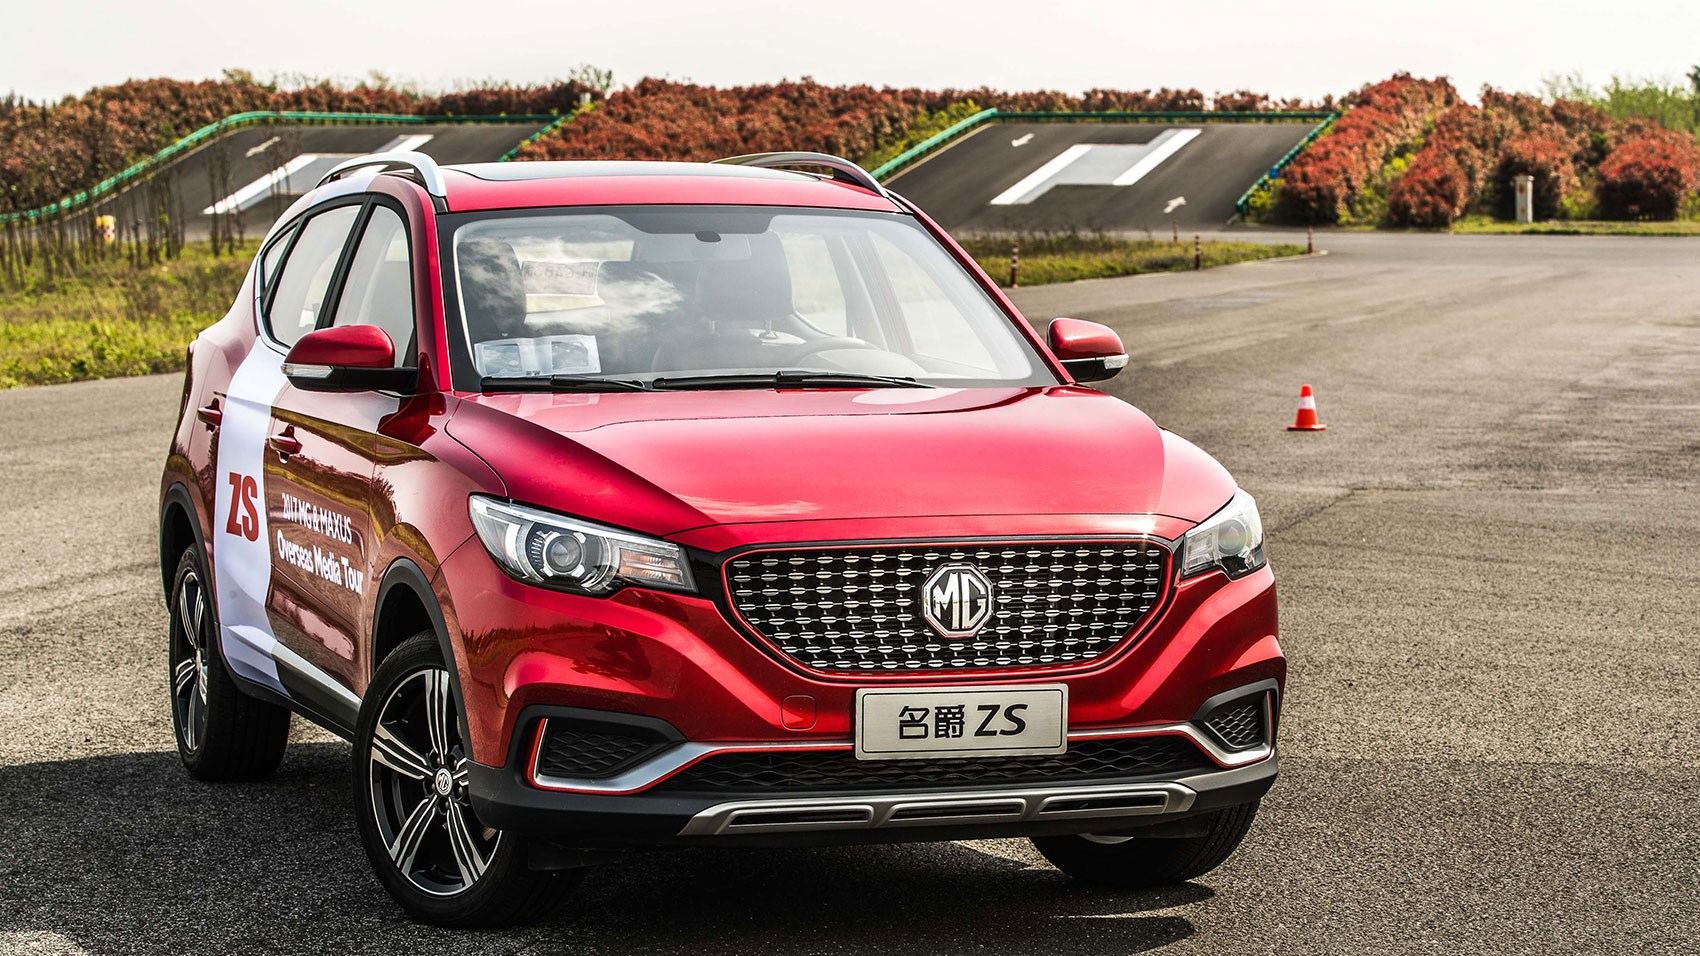 Deeply dished grille on MG ZS